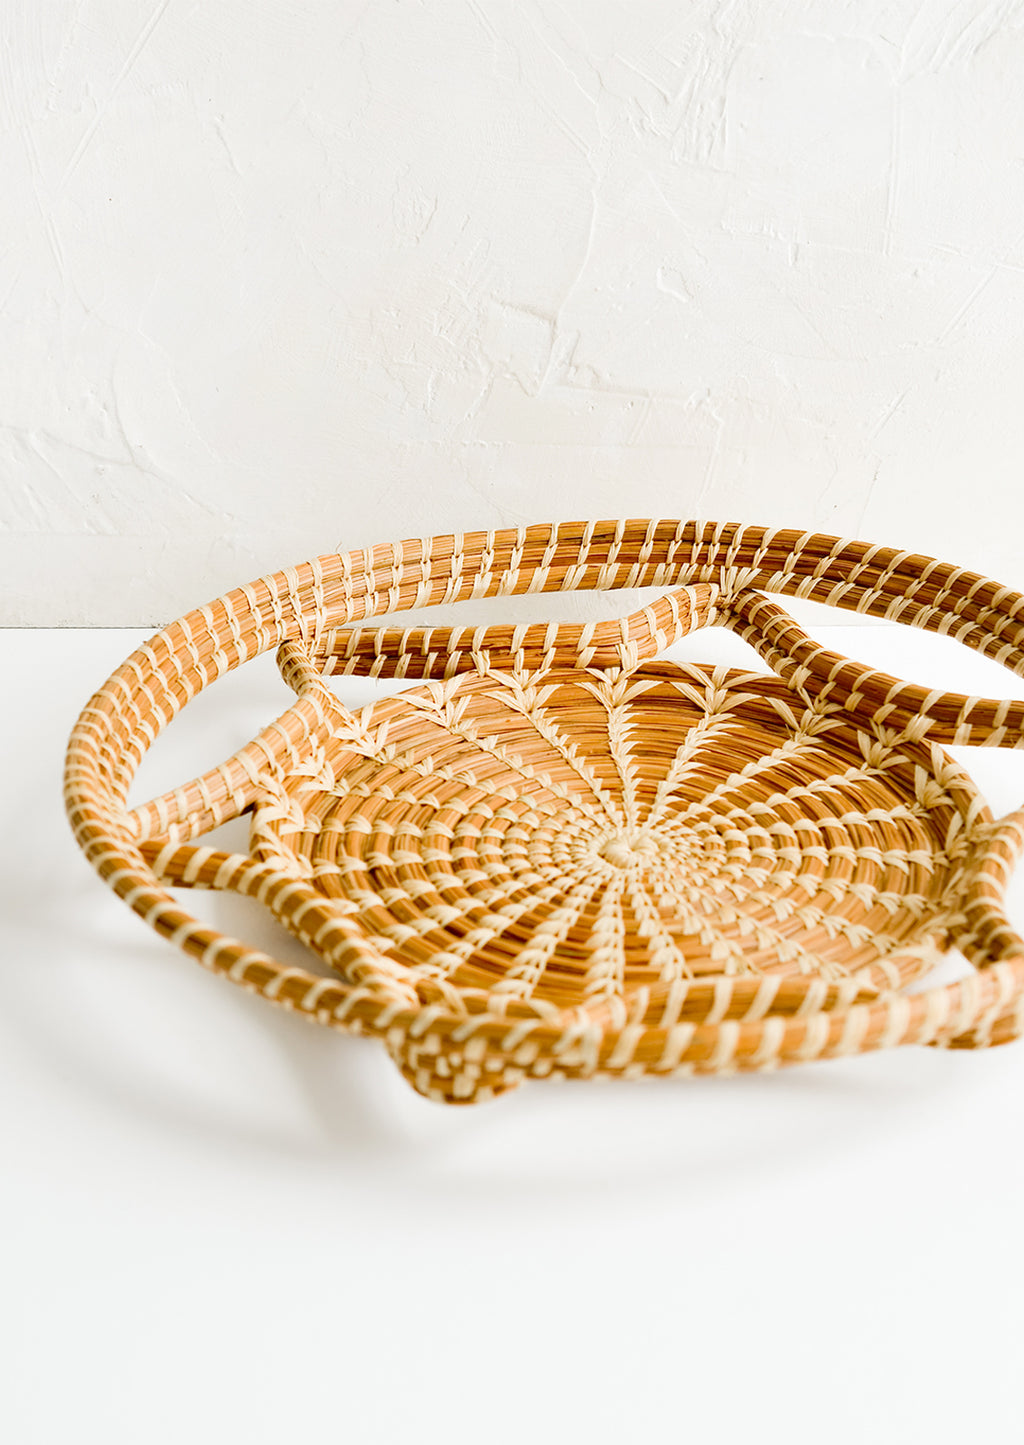 2: A round, flat tray with curved open weave design.